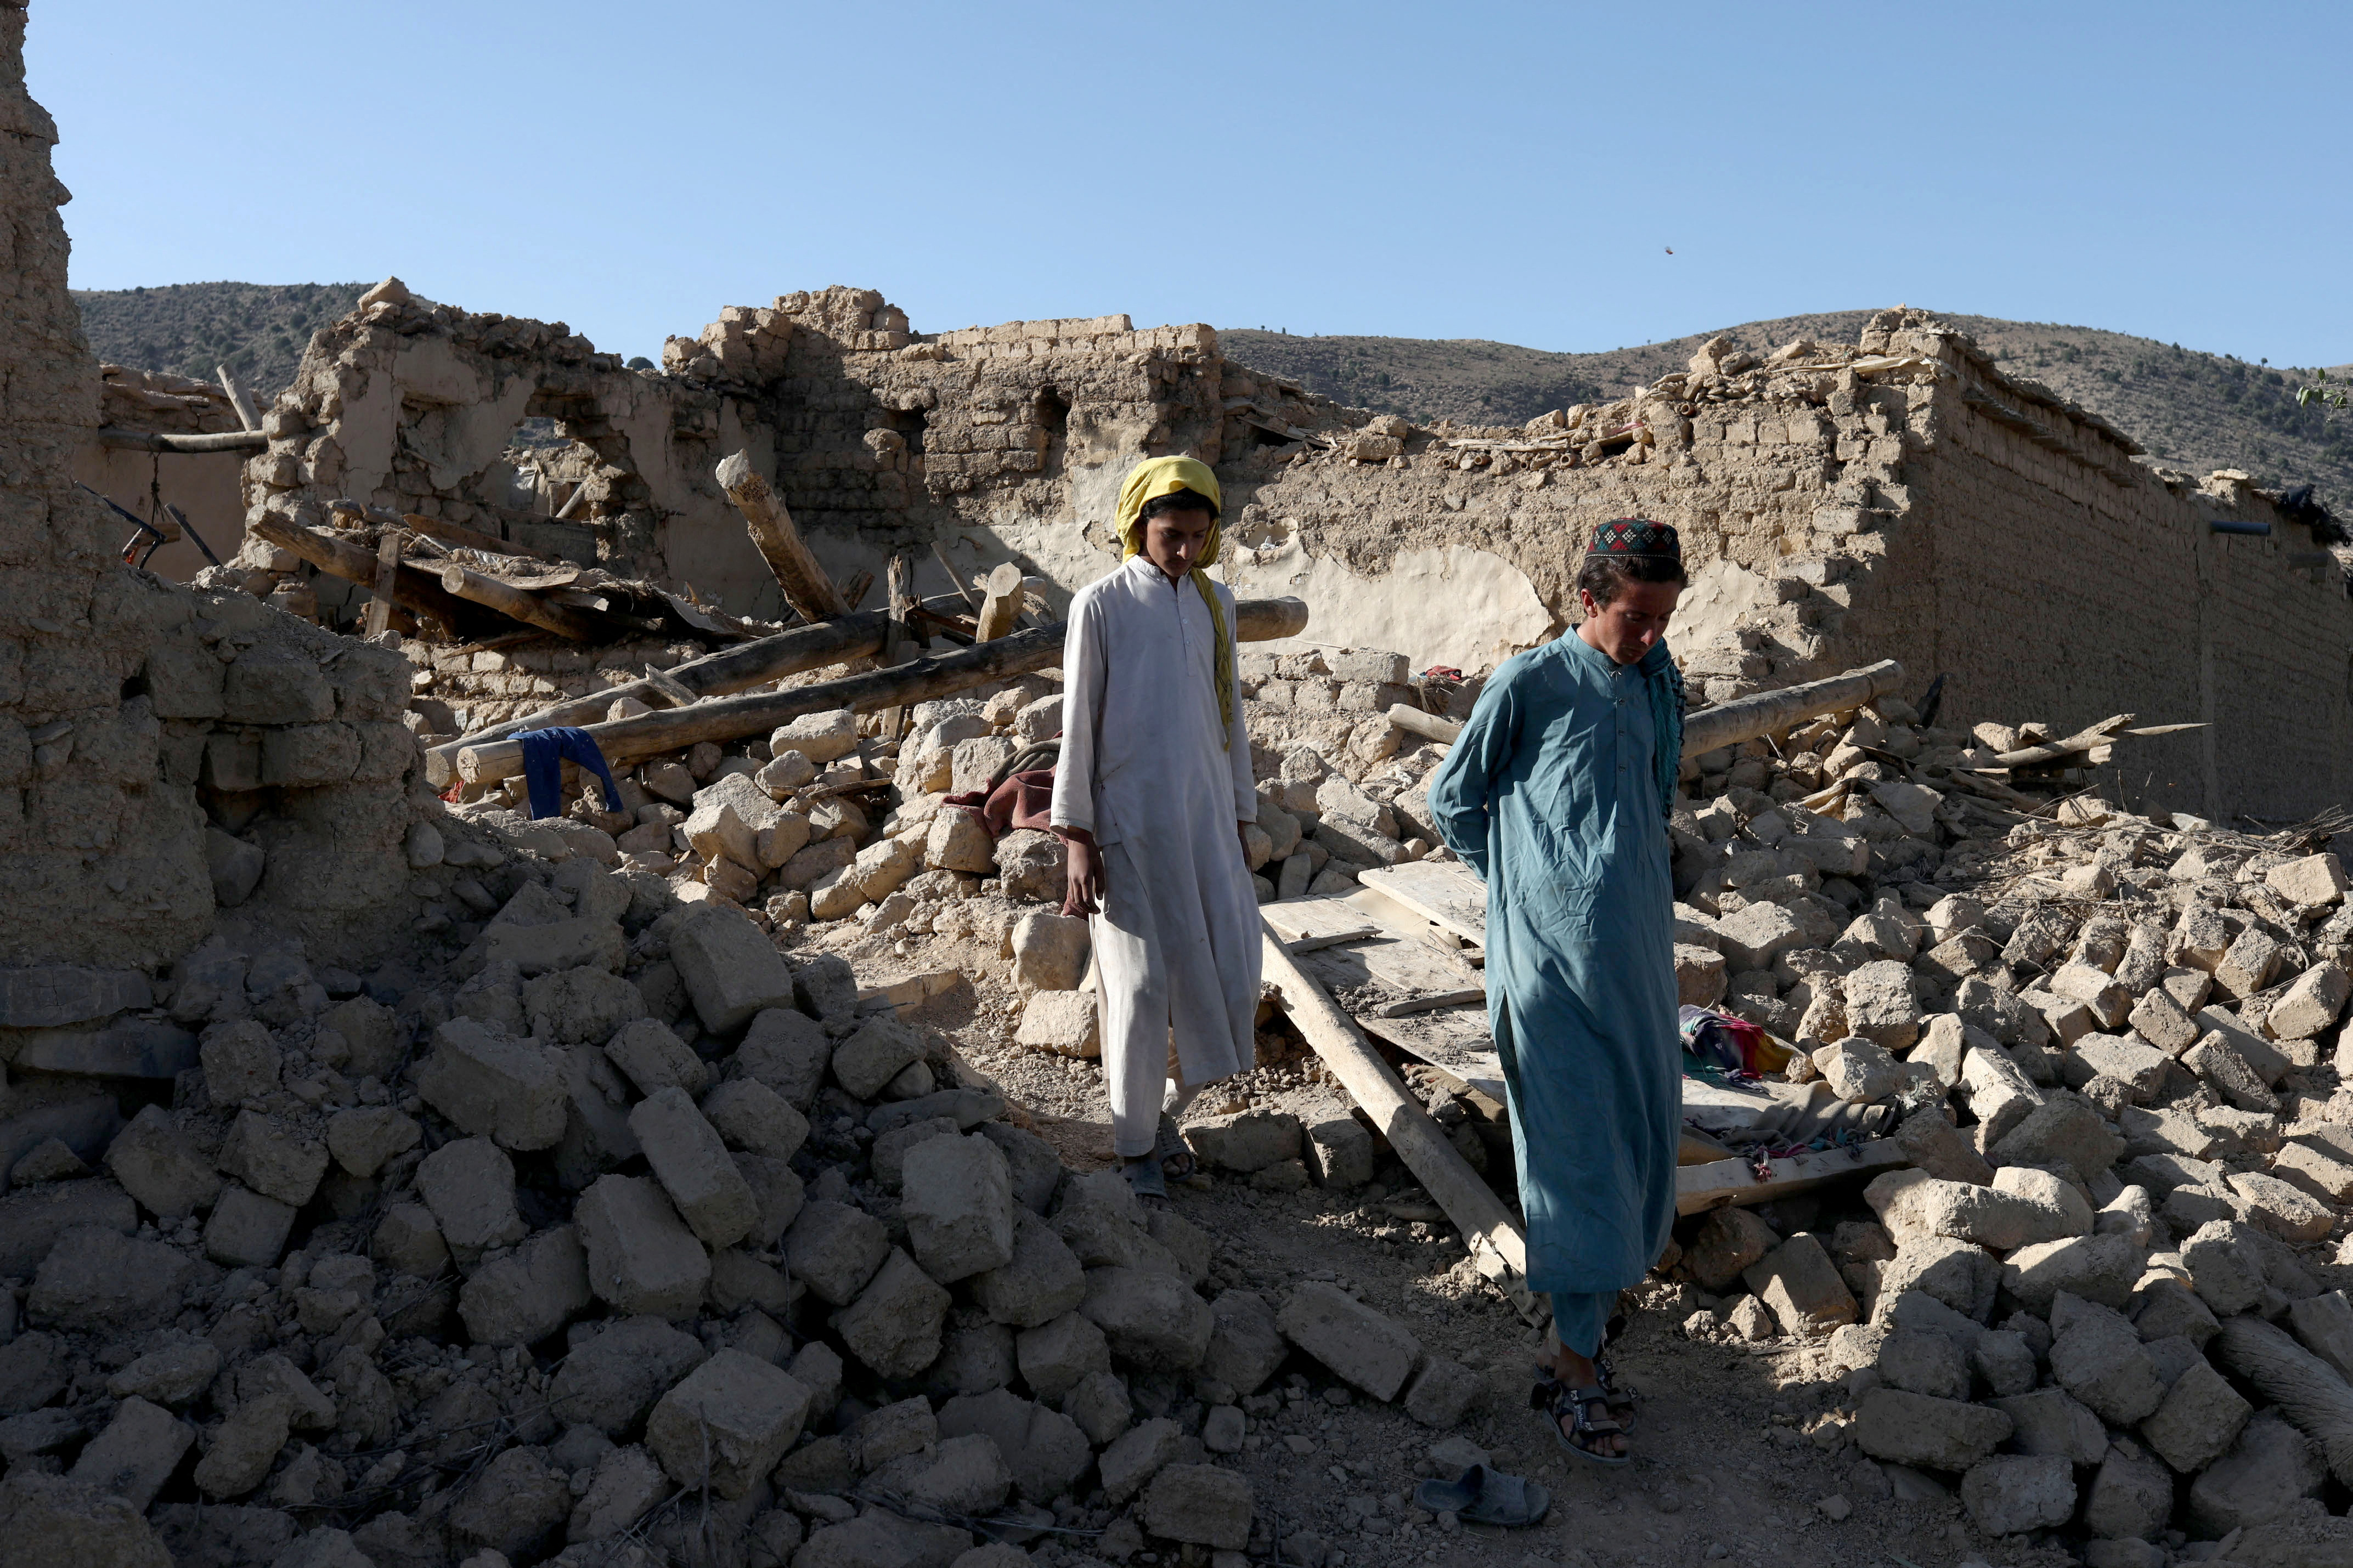 Afghans walk through the debris of damaged houses after the recent earthquake in Wor Kali village